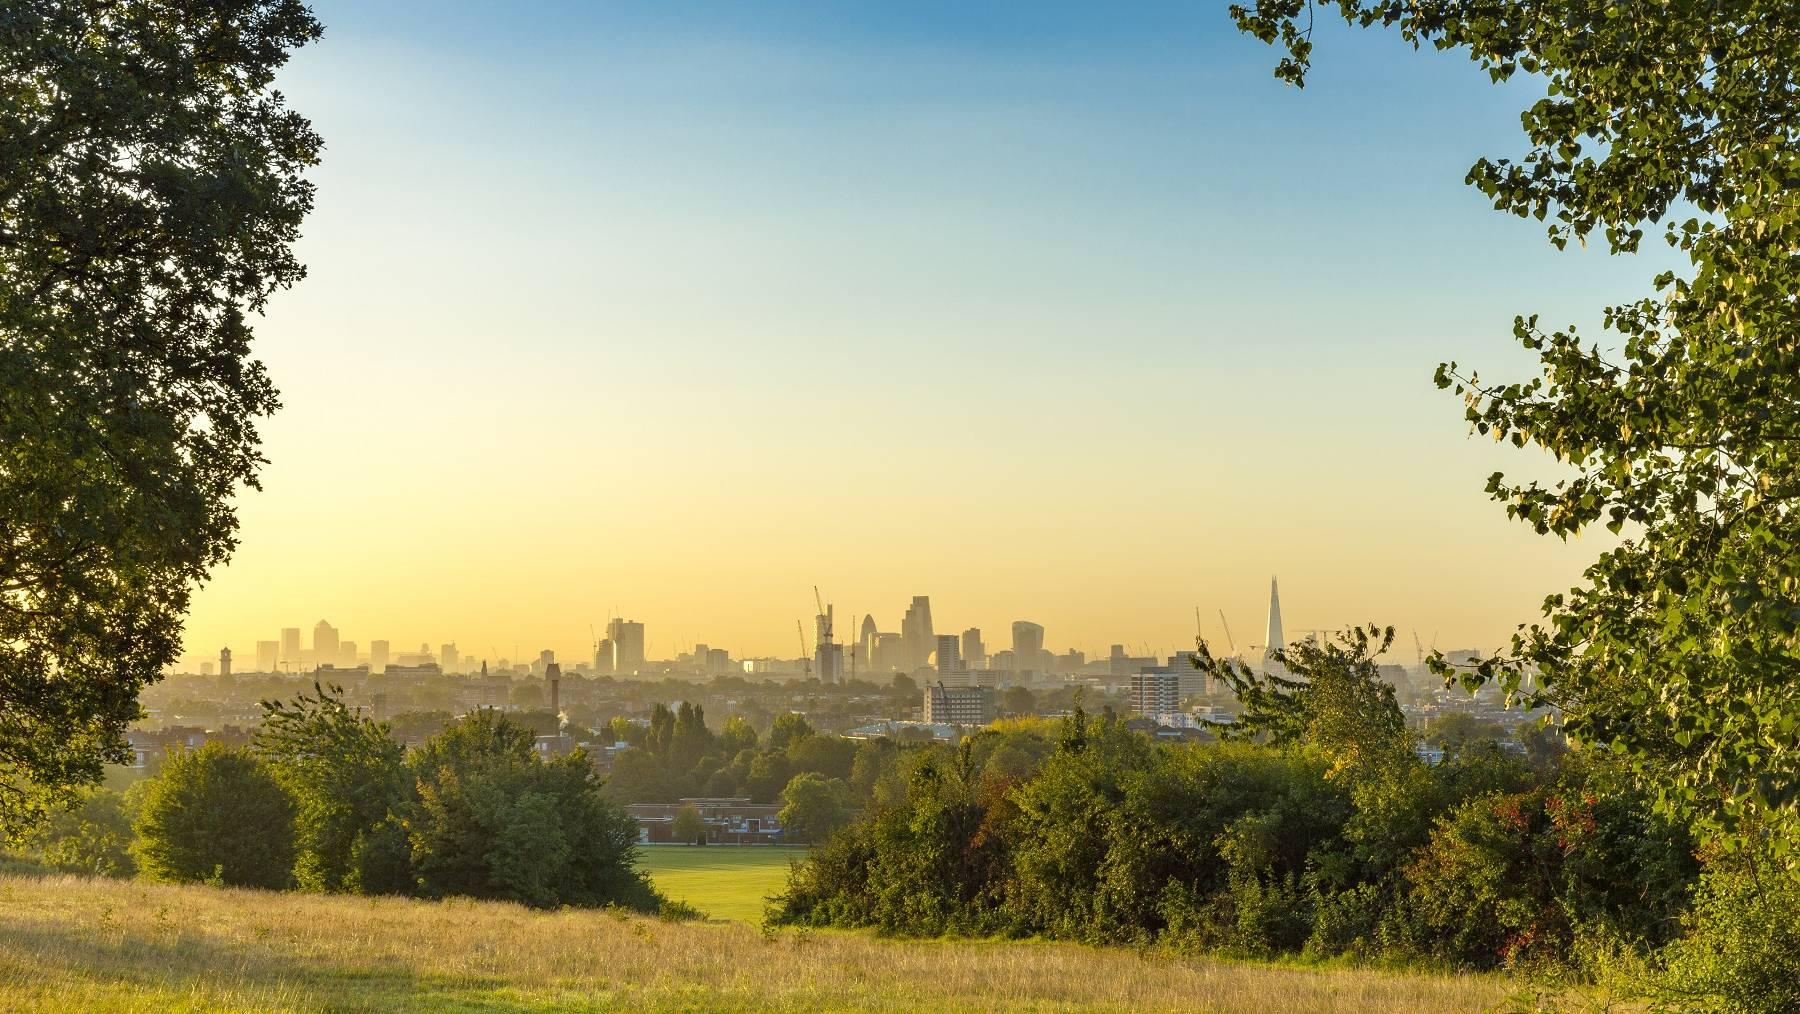 The best boroughs to live in London for green space